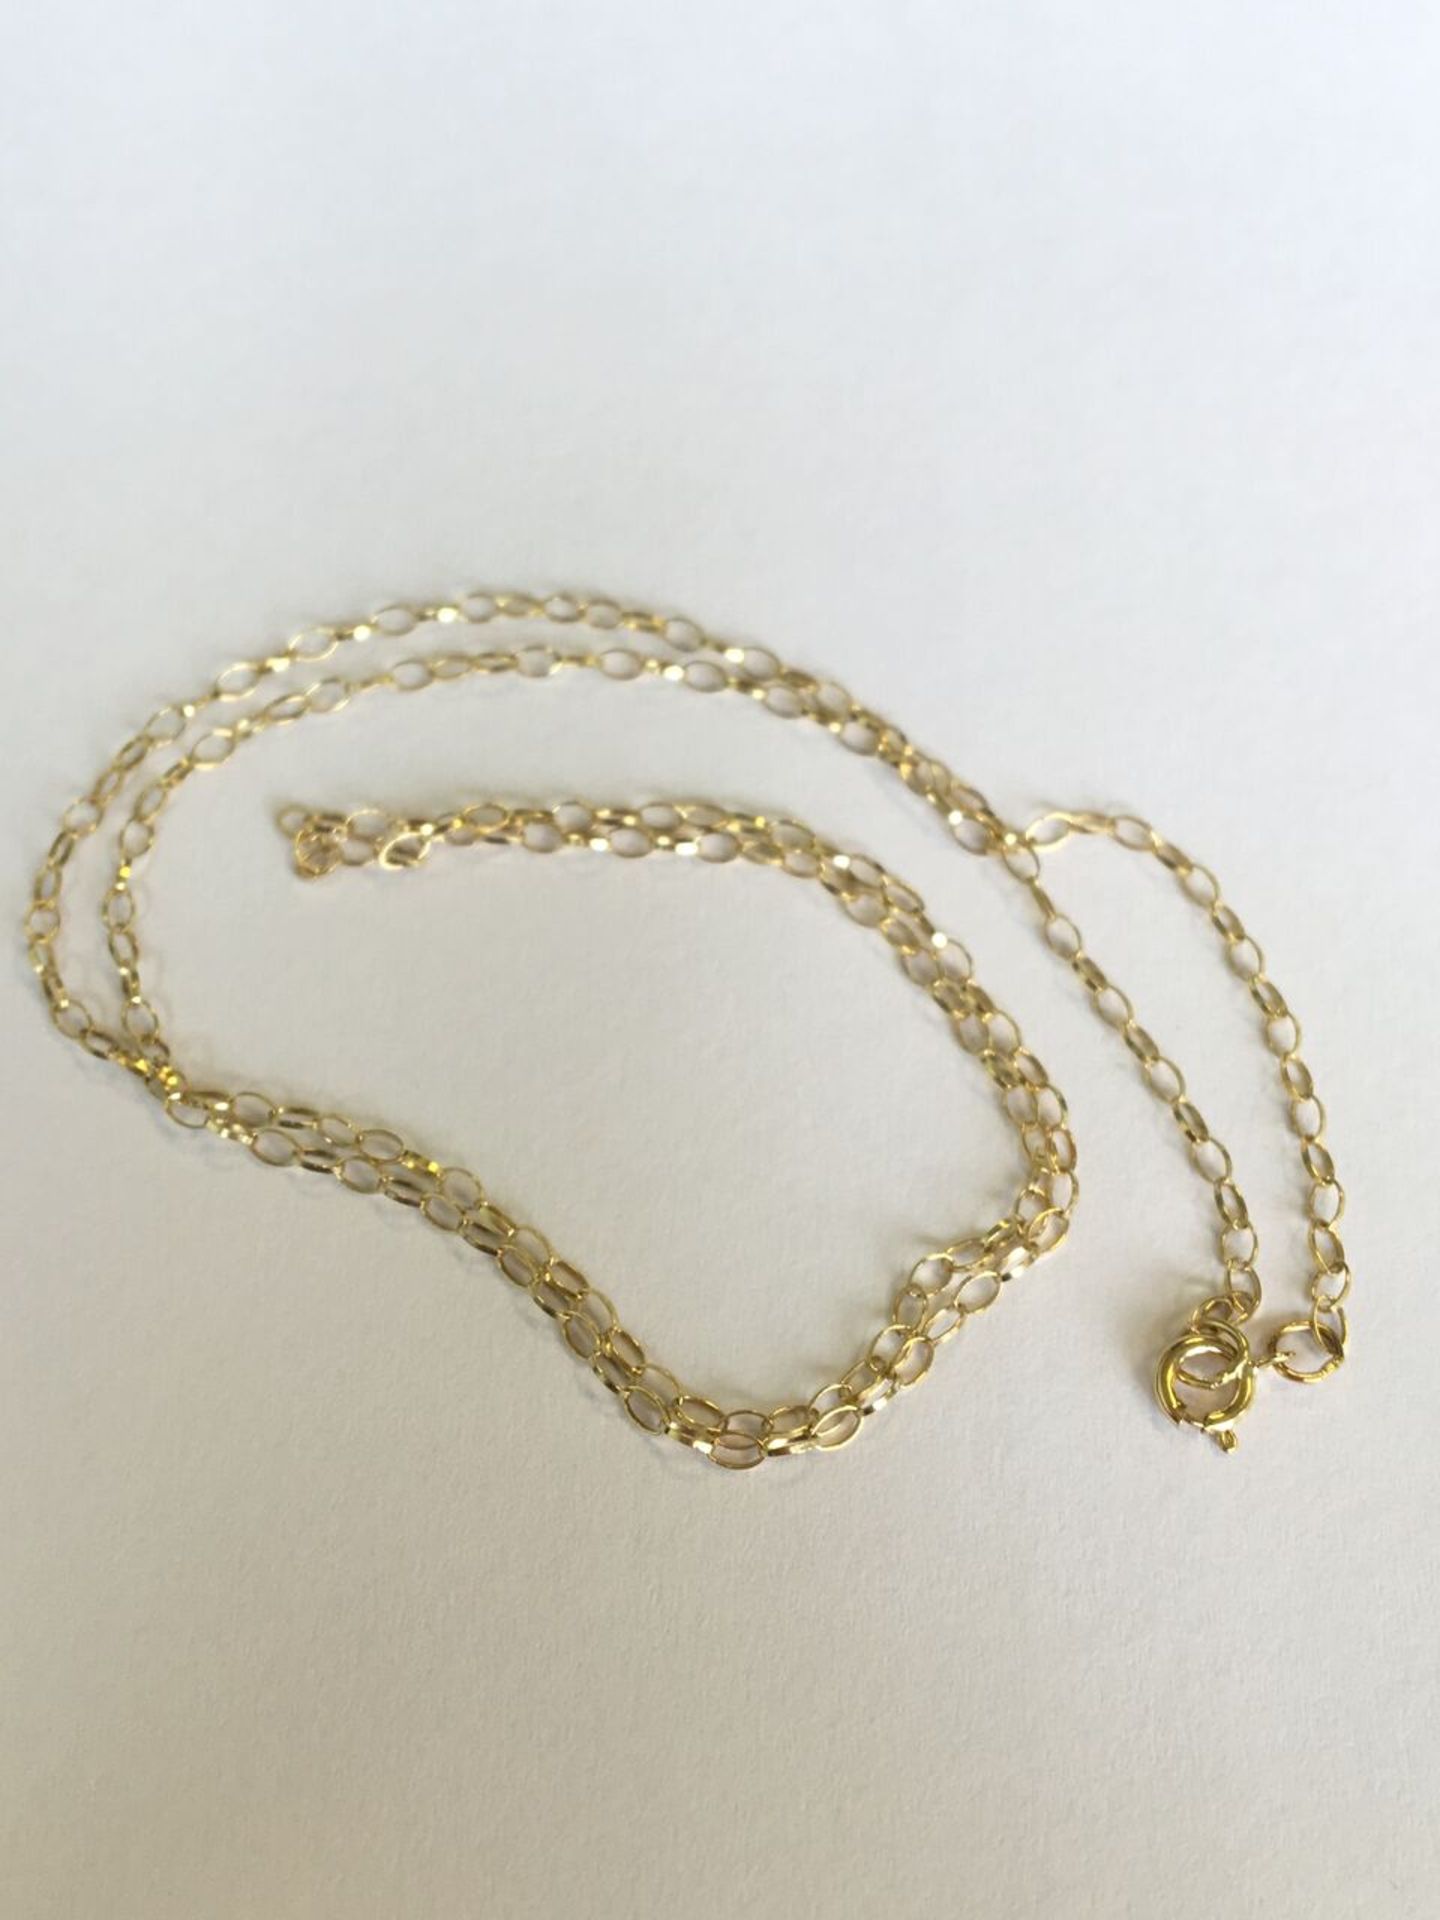 HALLMARKED 9CT YELLOW GOLD BELCHER CHAIN NECKLACE. 16" FREE UK DELIVERY. NO VAT.